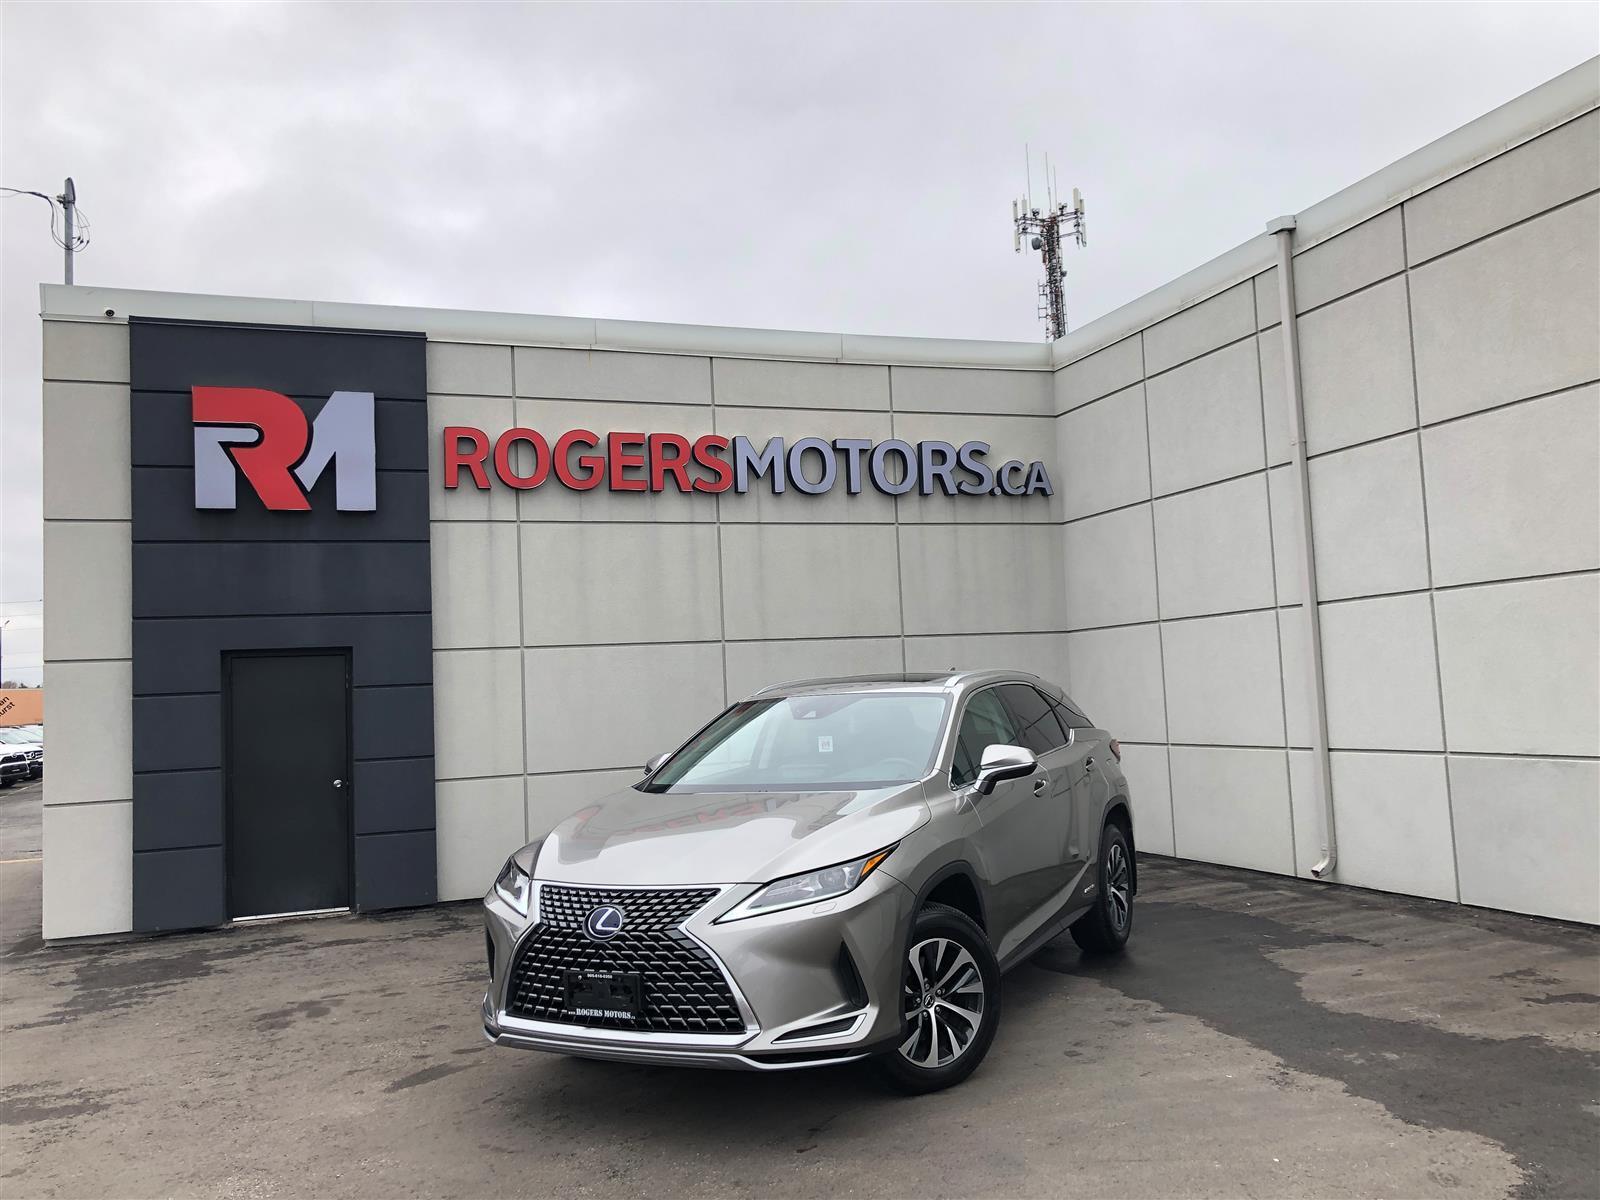 2022 Lexus RX 450H AWD - SUNROOF - LEATHER - TECH FEATURES